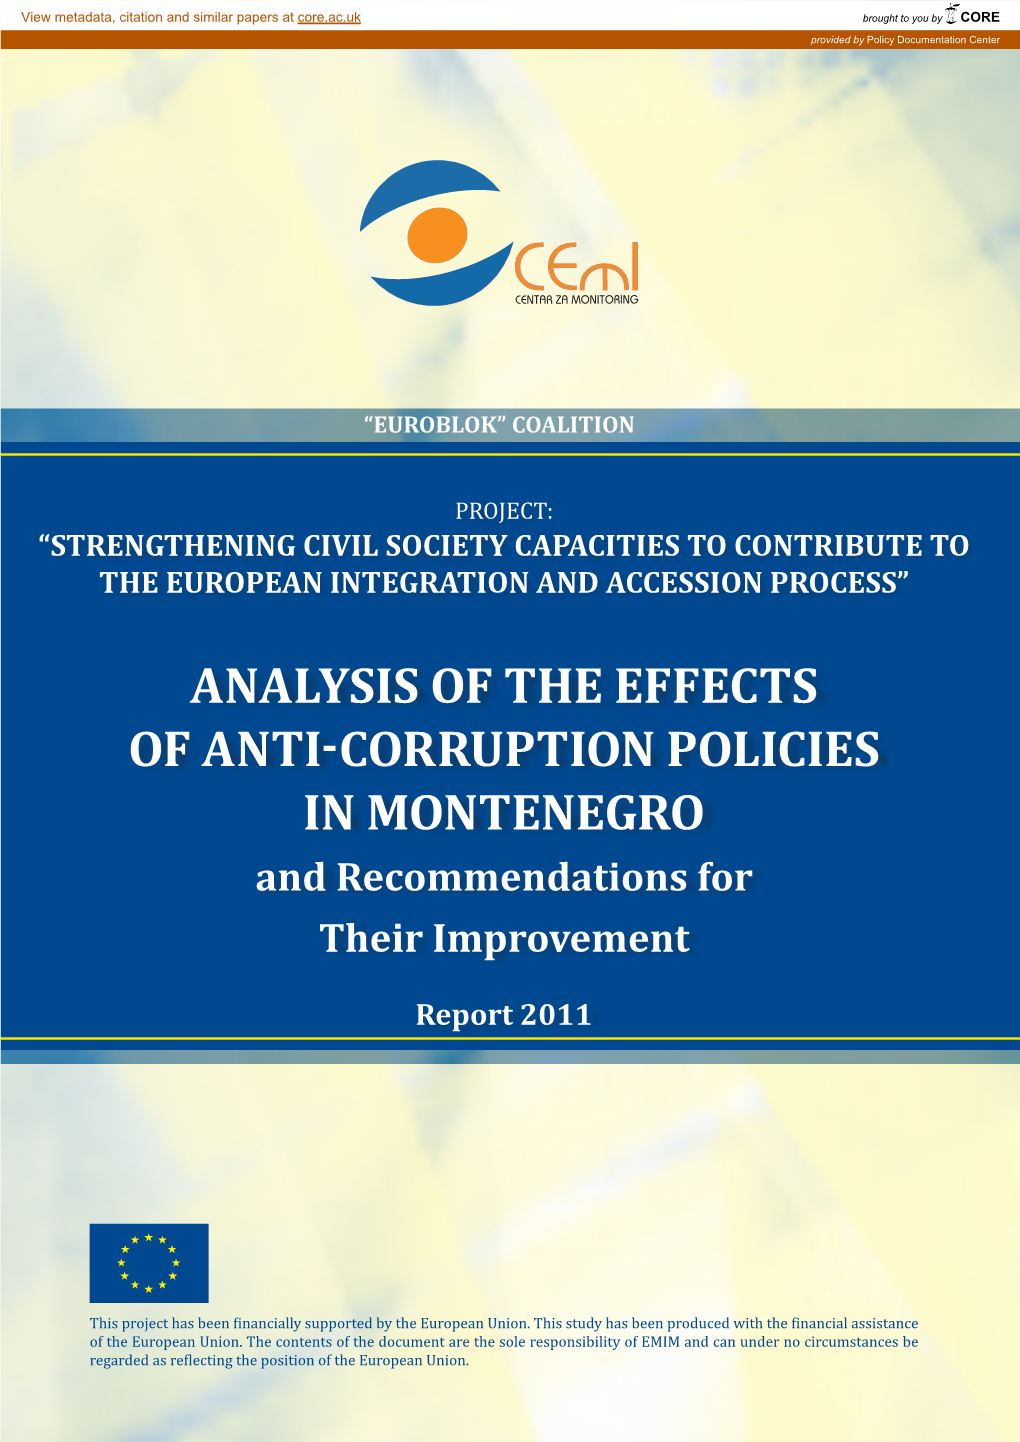 Analysis of the Effects of Anti-Corruption Policies in Montenegro and Recommendations for Their Improvement